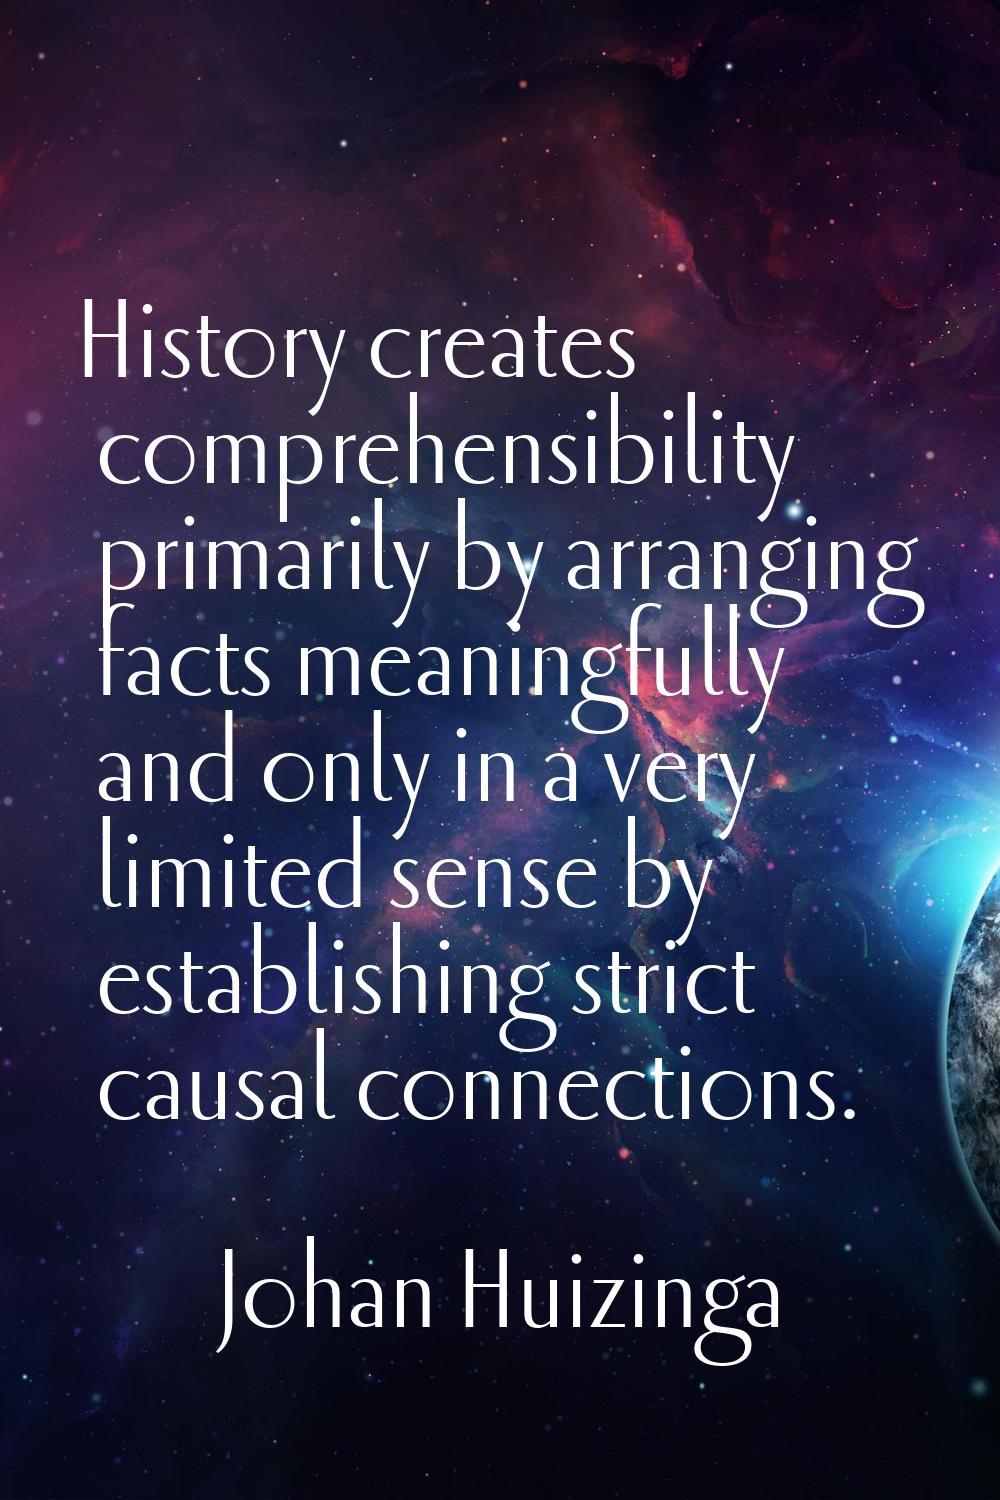 History creates comprehensibility primarily by arranging facts meaningfully and only in a very limi